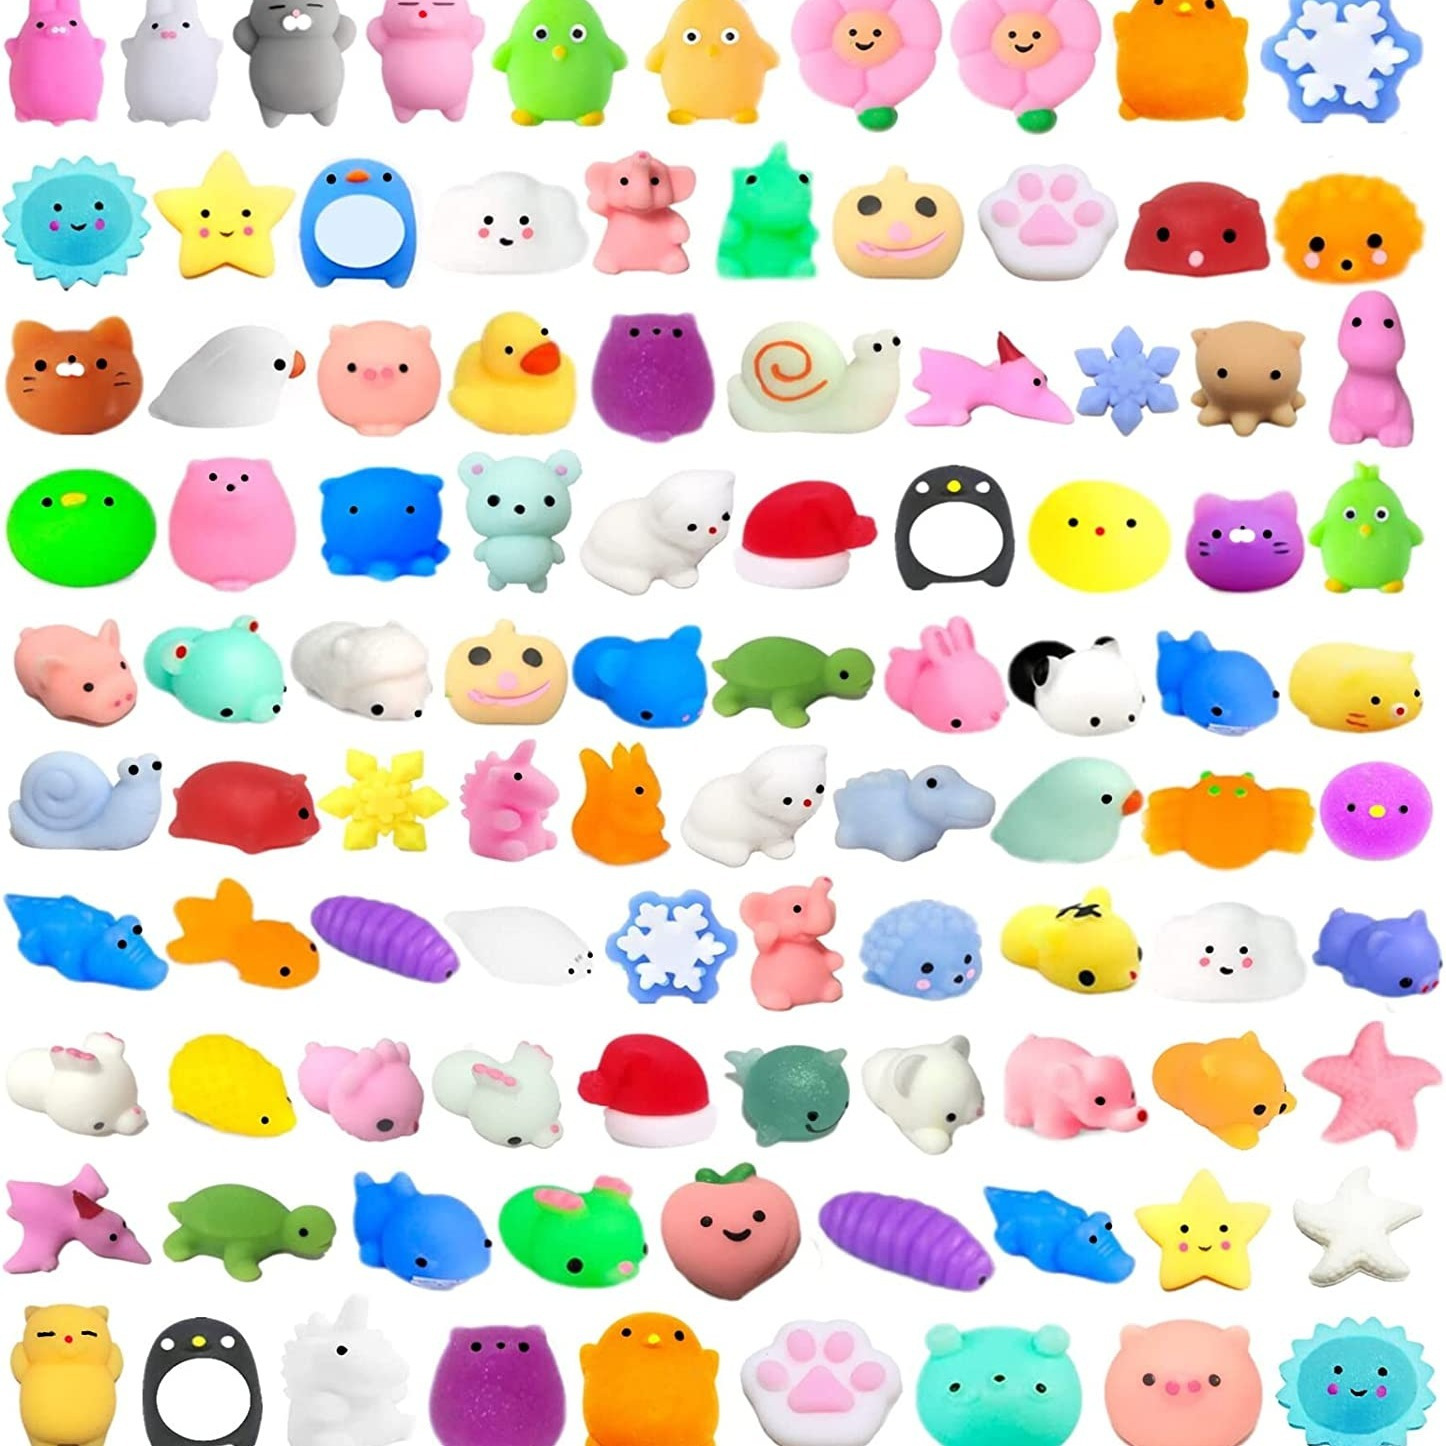 Cherislpy 100Pcs Kawaii Squishies,Mini Mochi Squishy Squeeze Toys Stress  Reliever Anxiety Packs for Kids Party Favors Goodie Bag Birthday